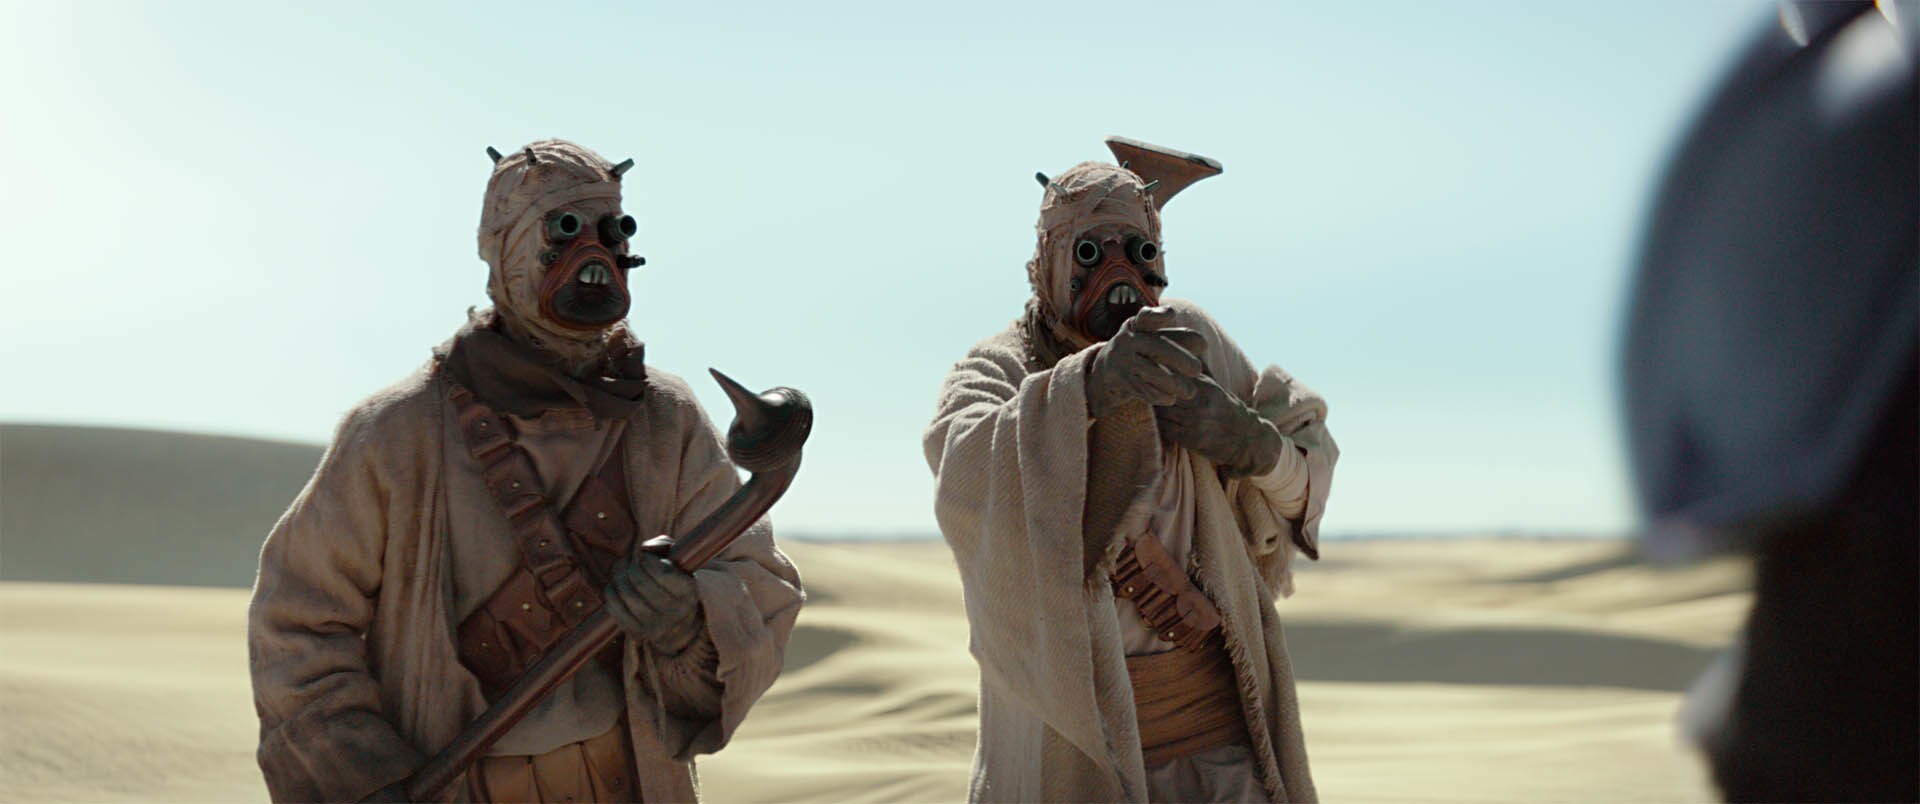 When the Mandalorian first communicates with the
Tusken Raiders, his sign language translates to...